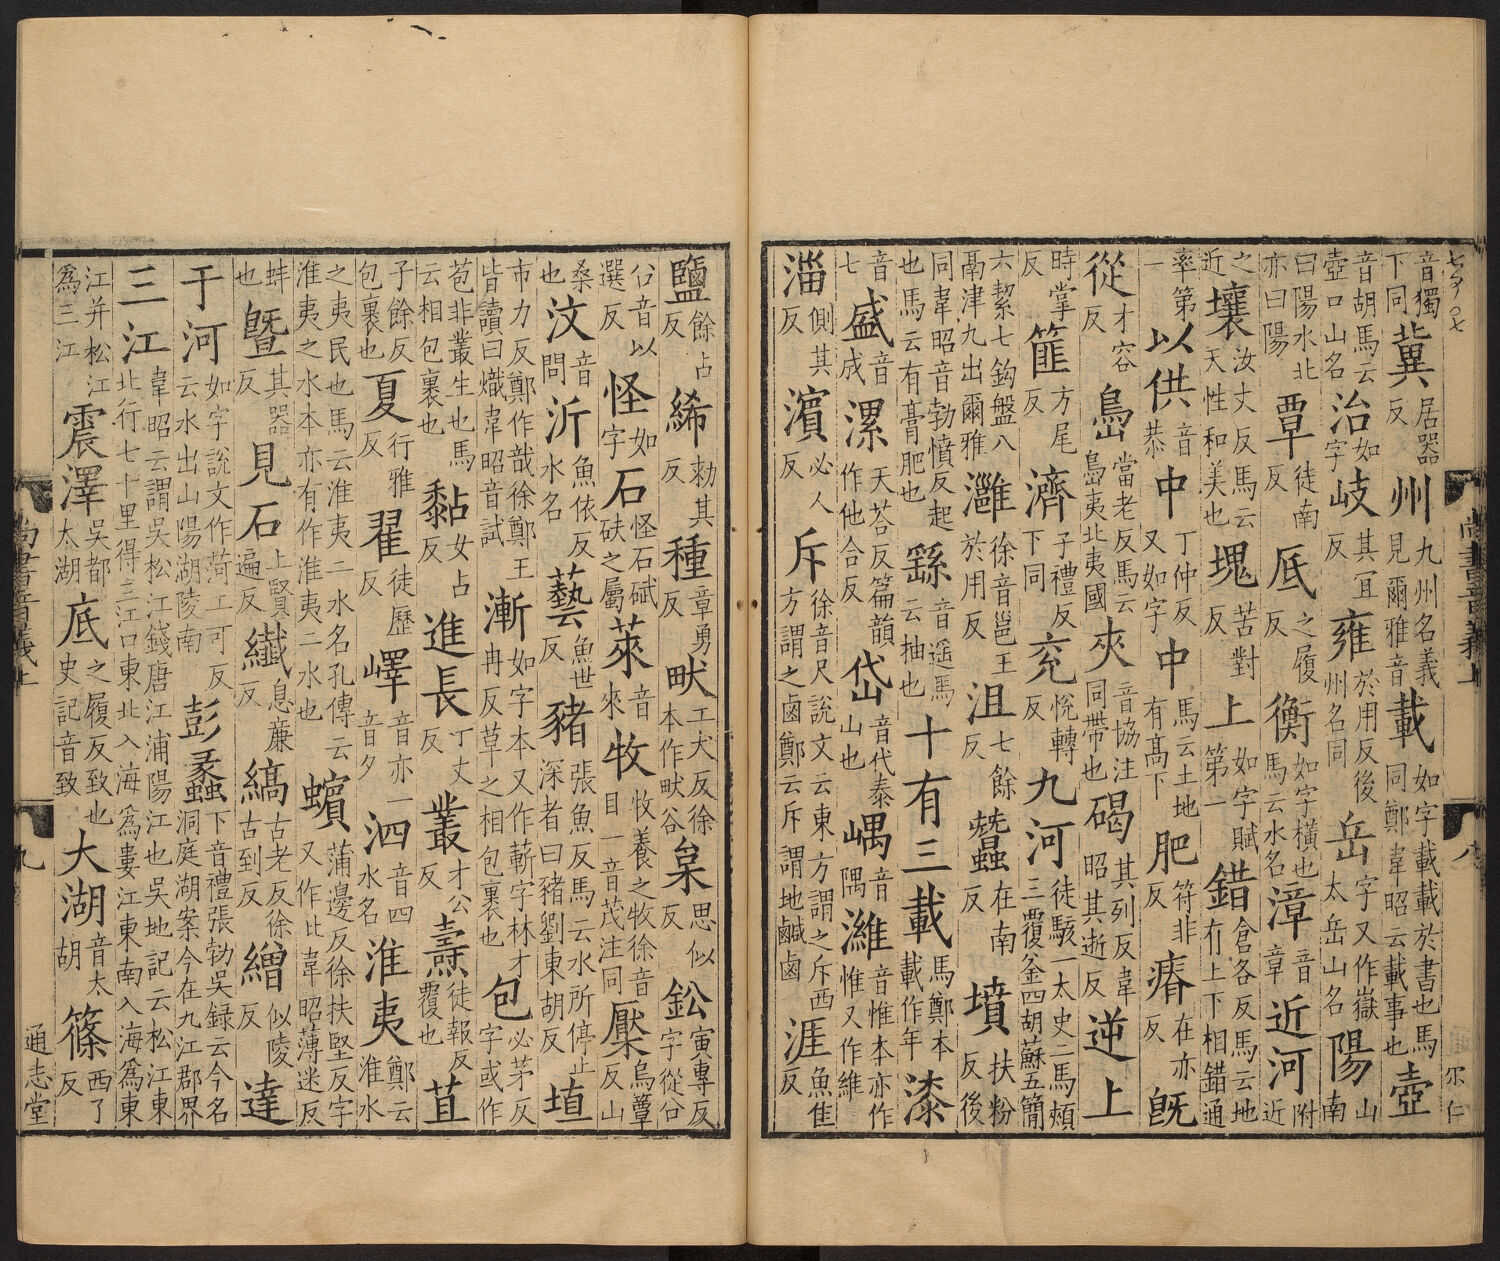 Folio view of vertical Chinese script with large characters and half-width notes in a smaller font size